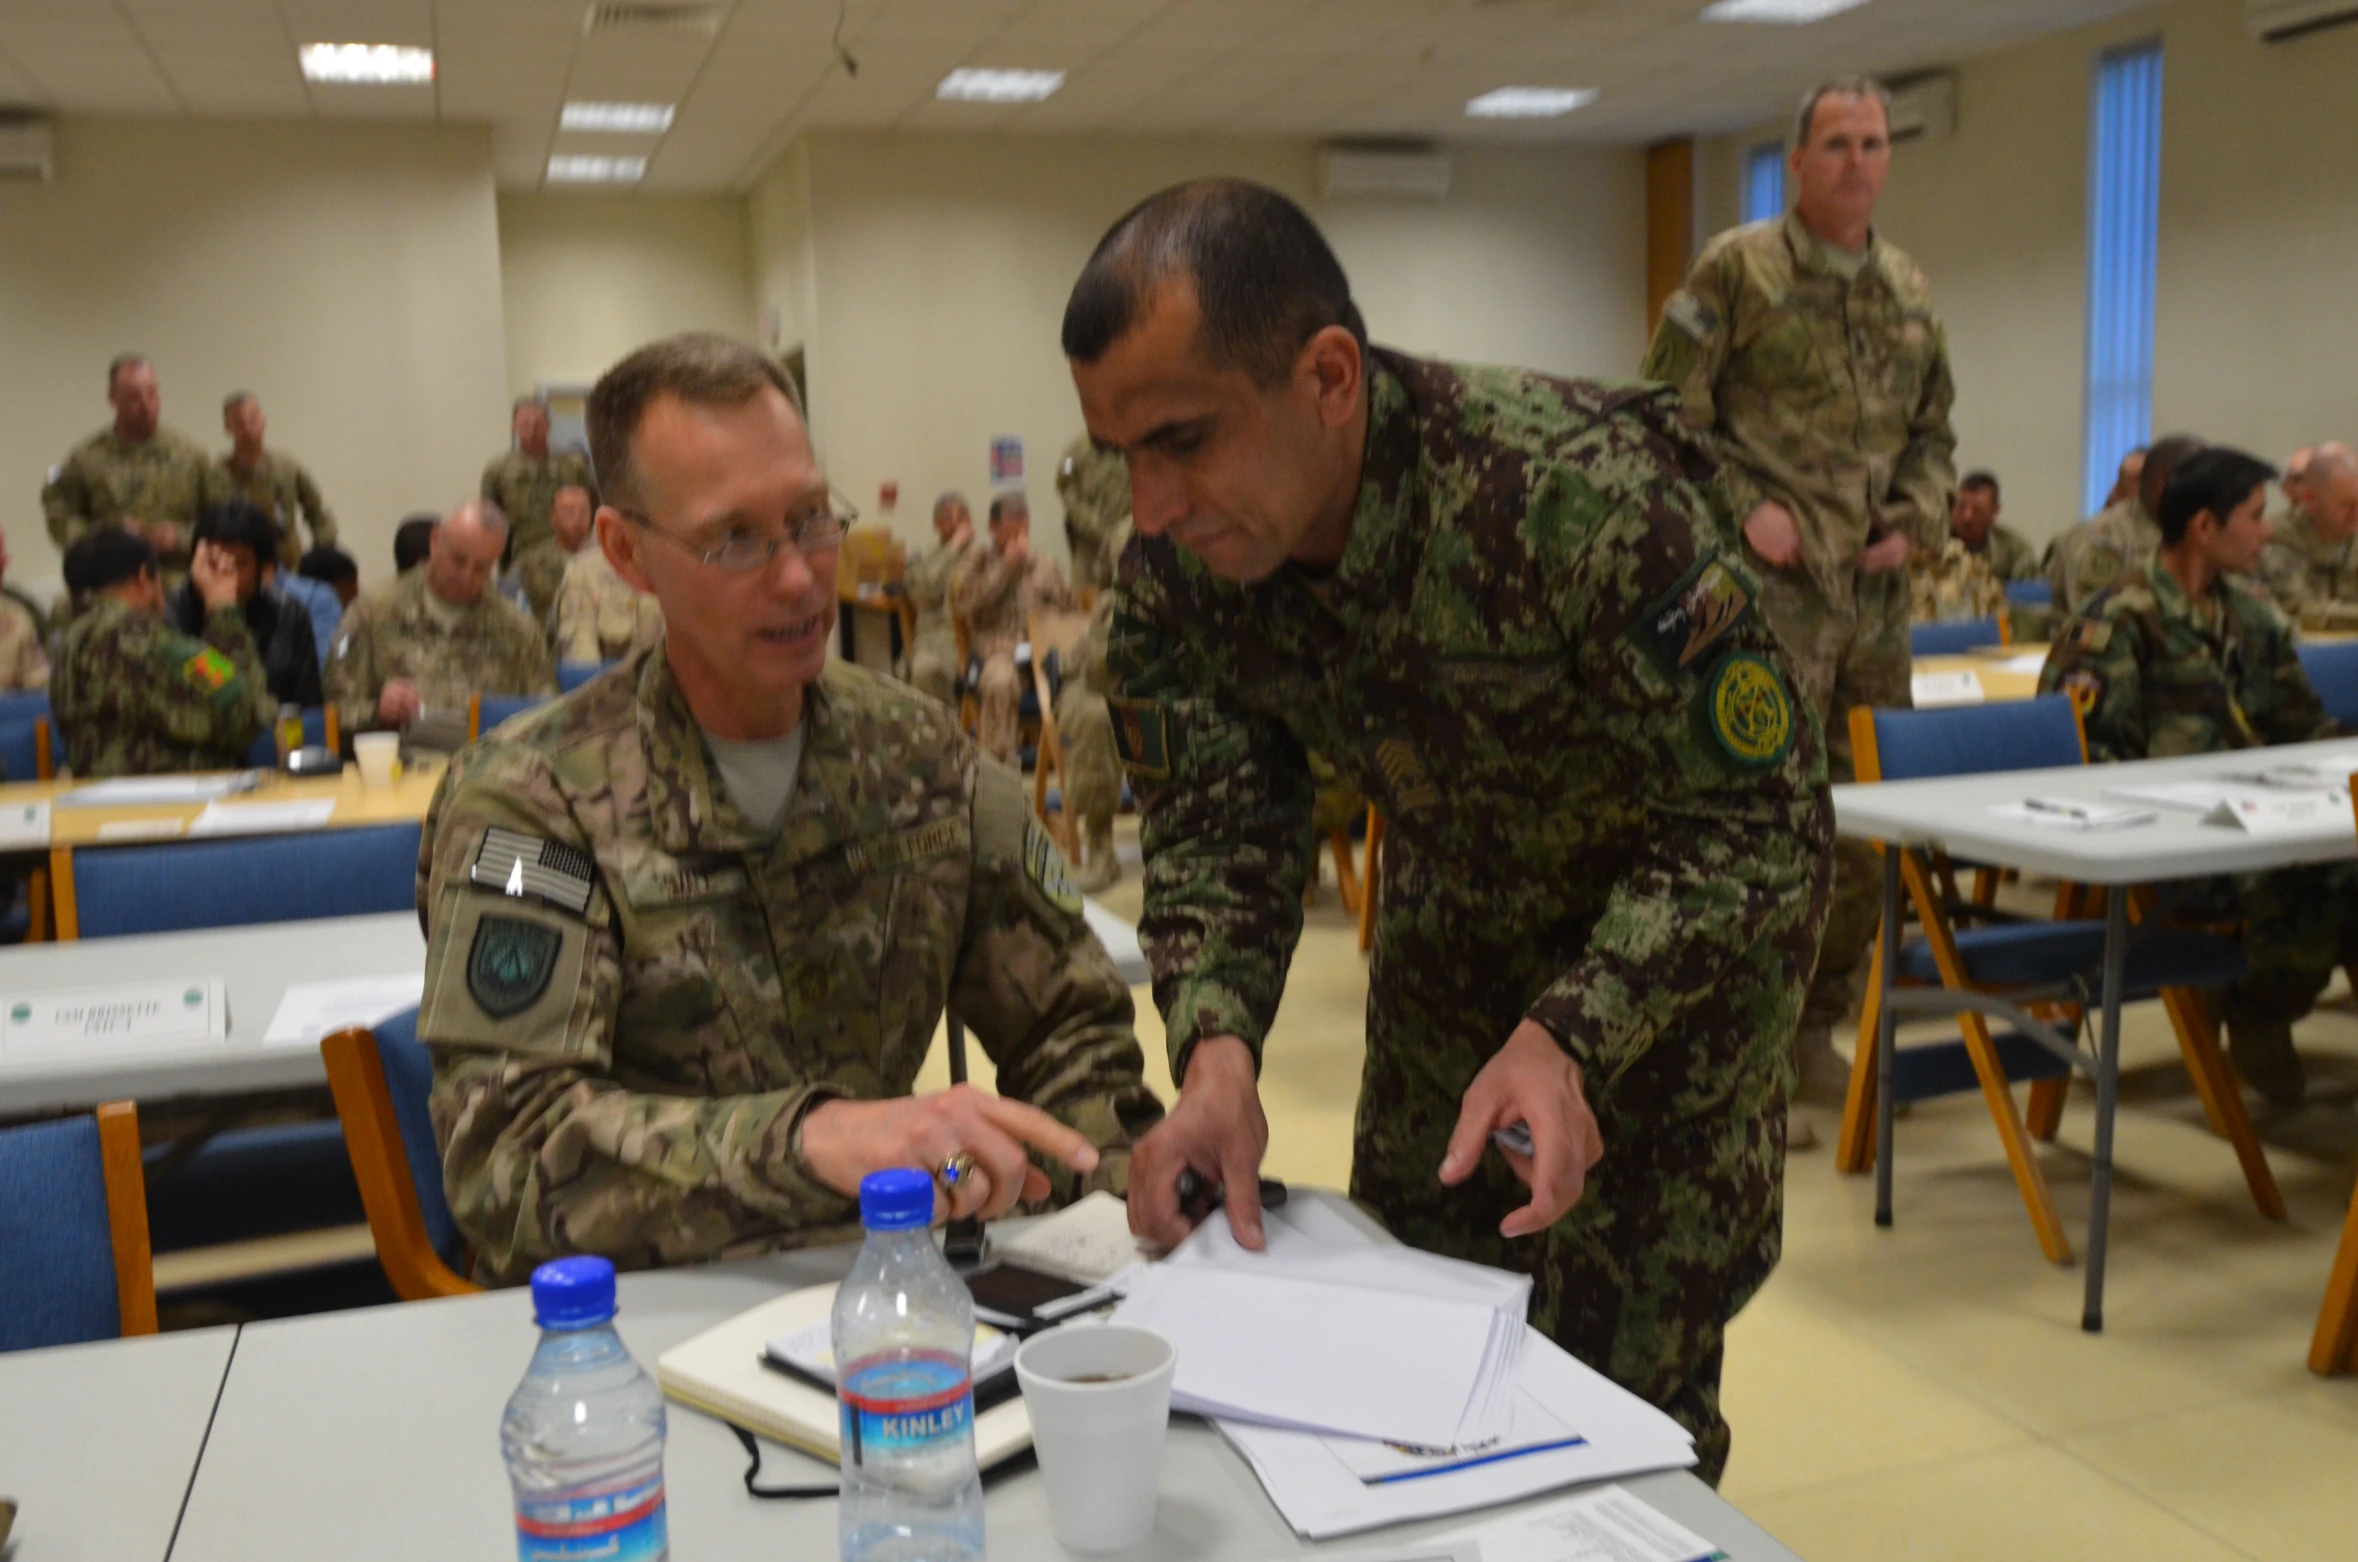 two military men in uniforms look at documents with water bottles